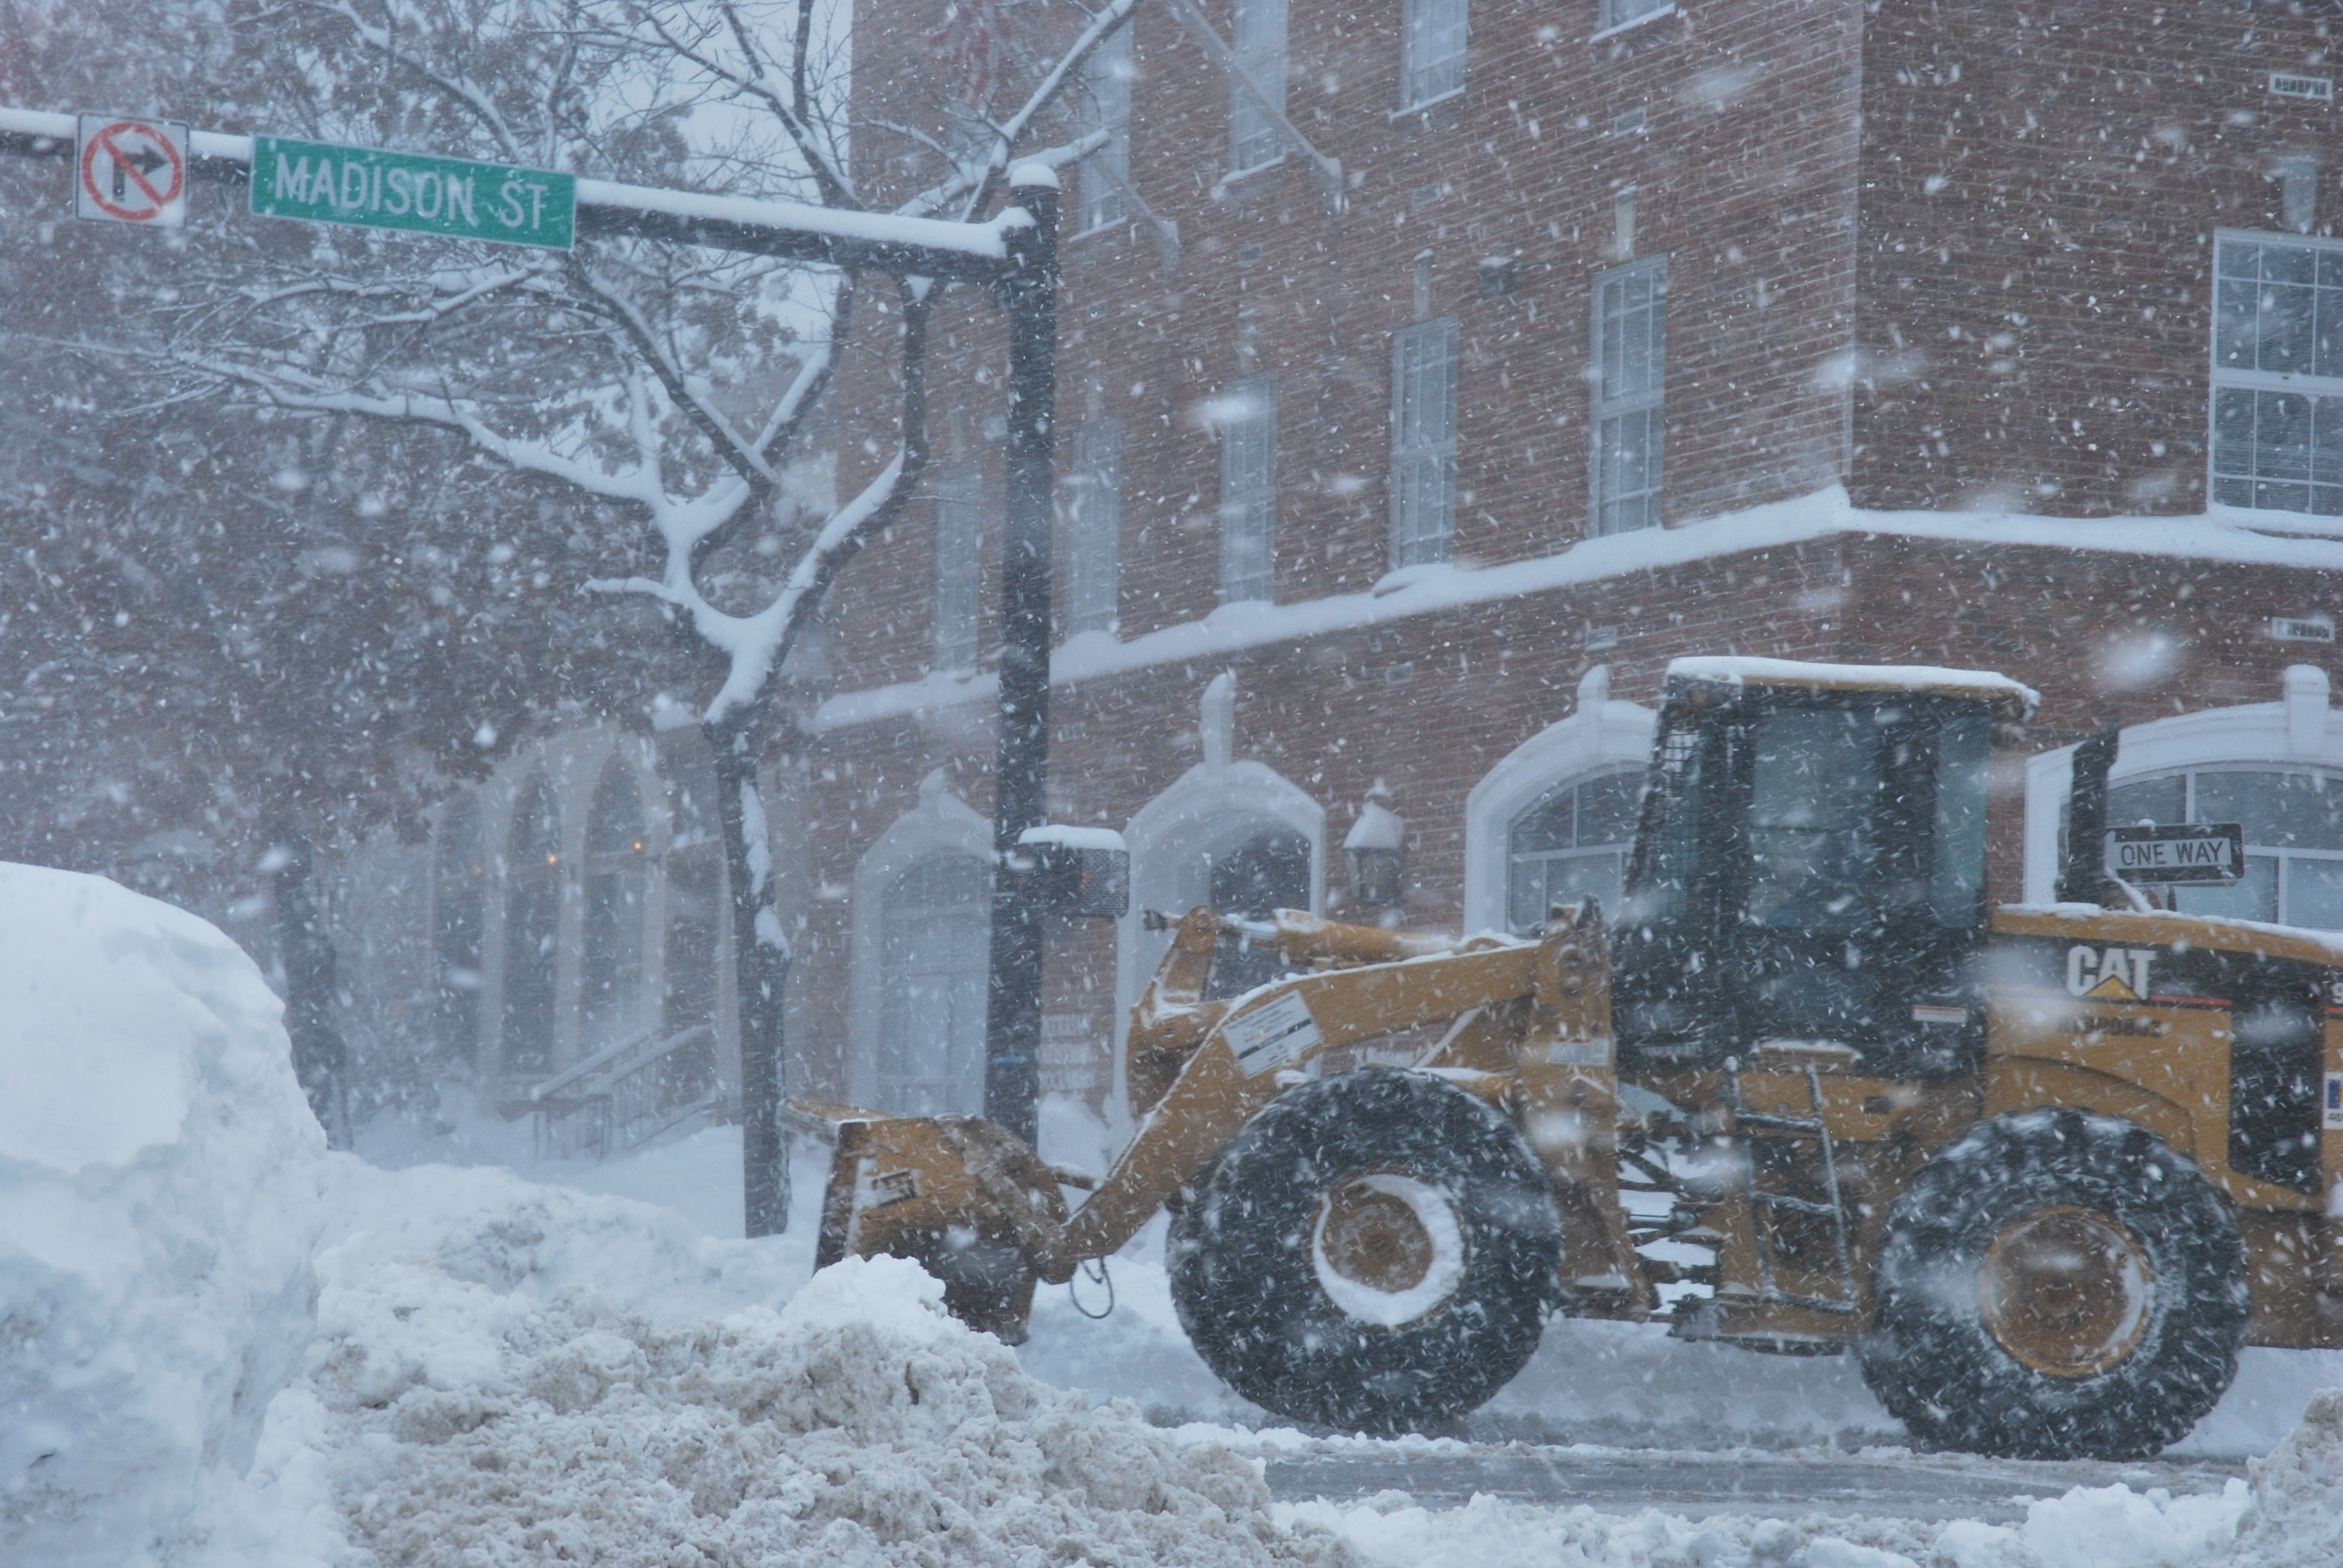 Your view: City snow removal policies are out of date